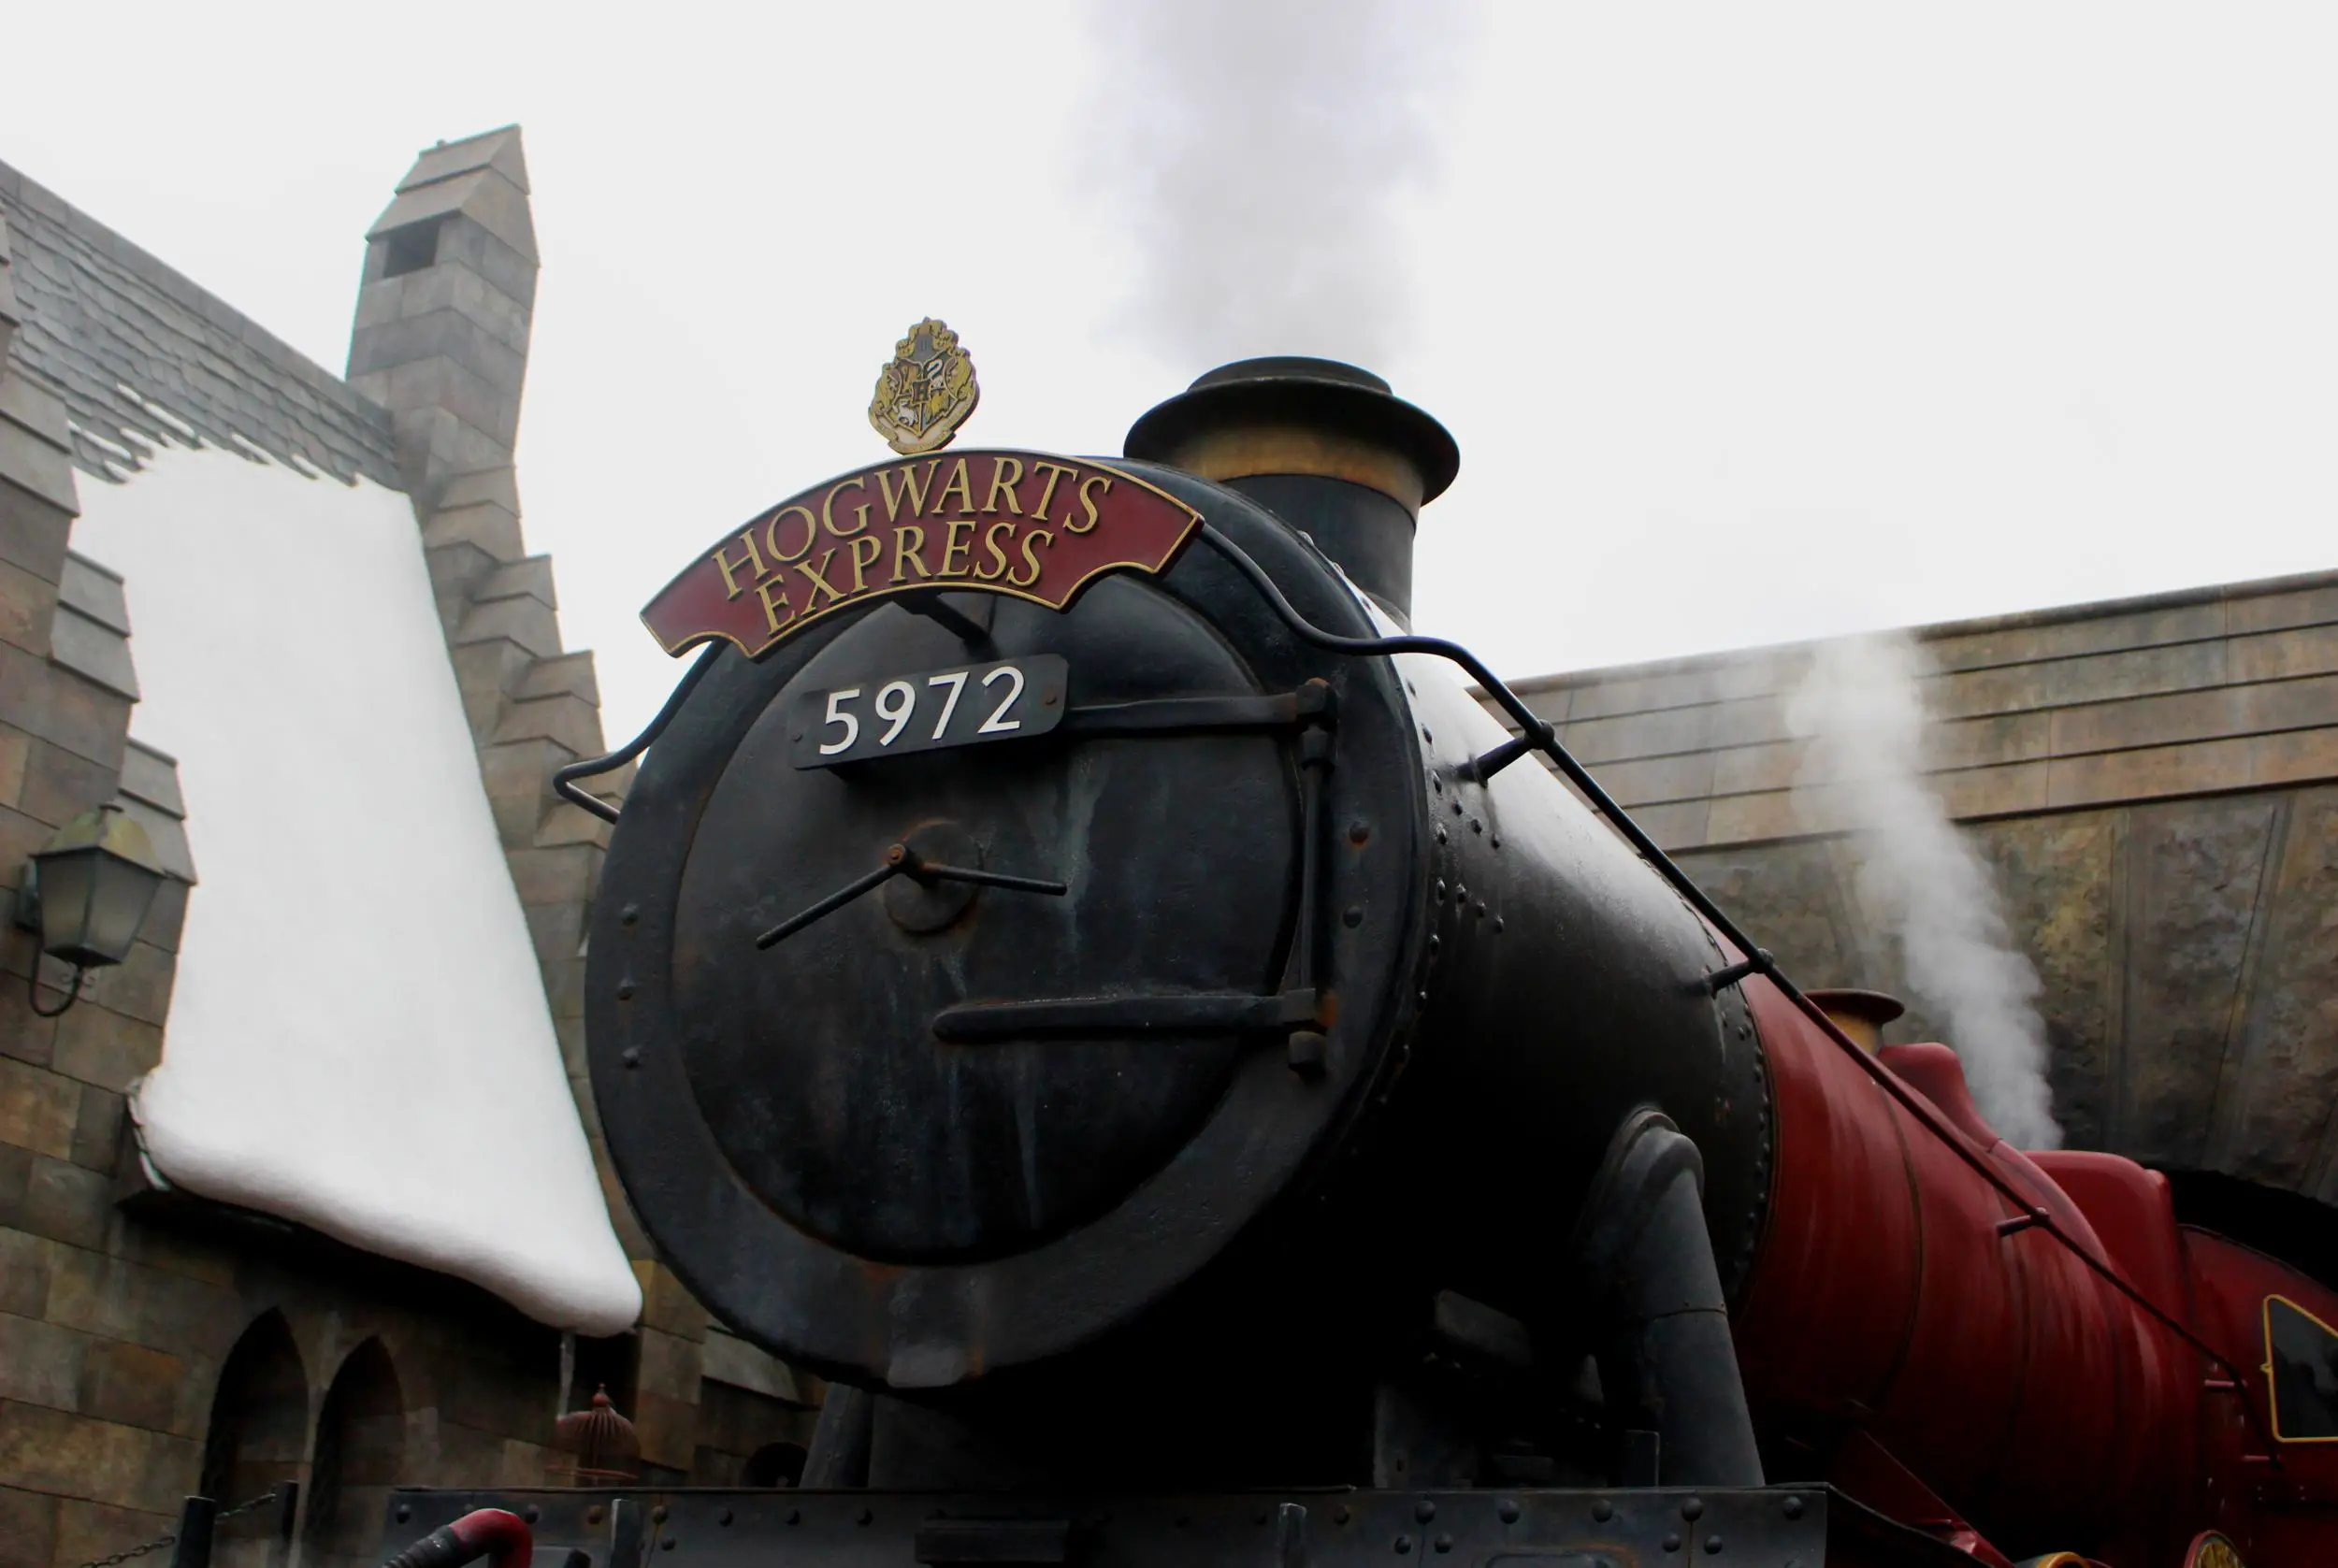 Get Your Photo Taken with the Hogwarts Express